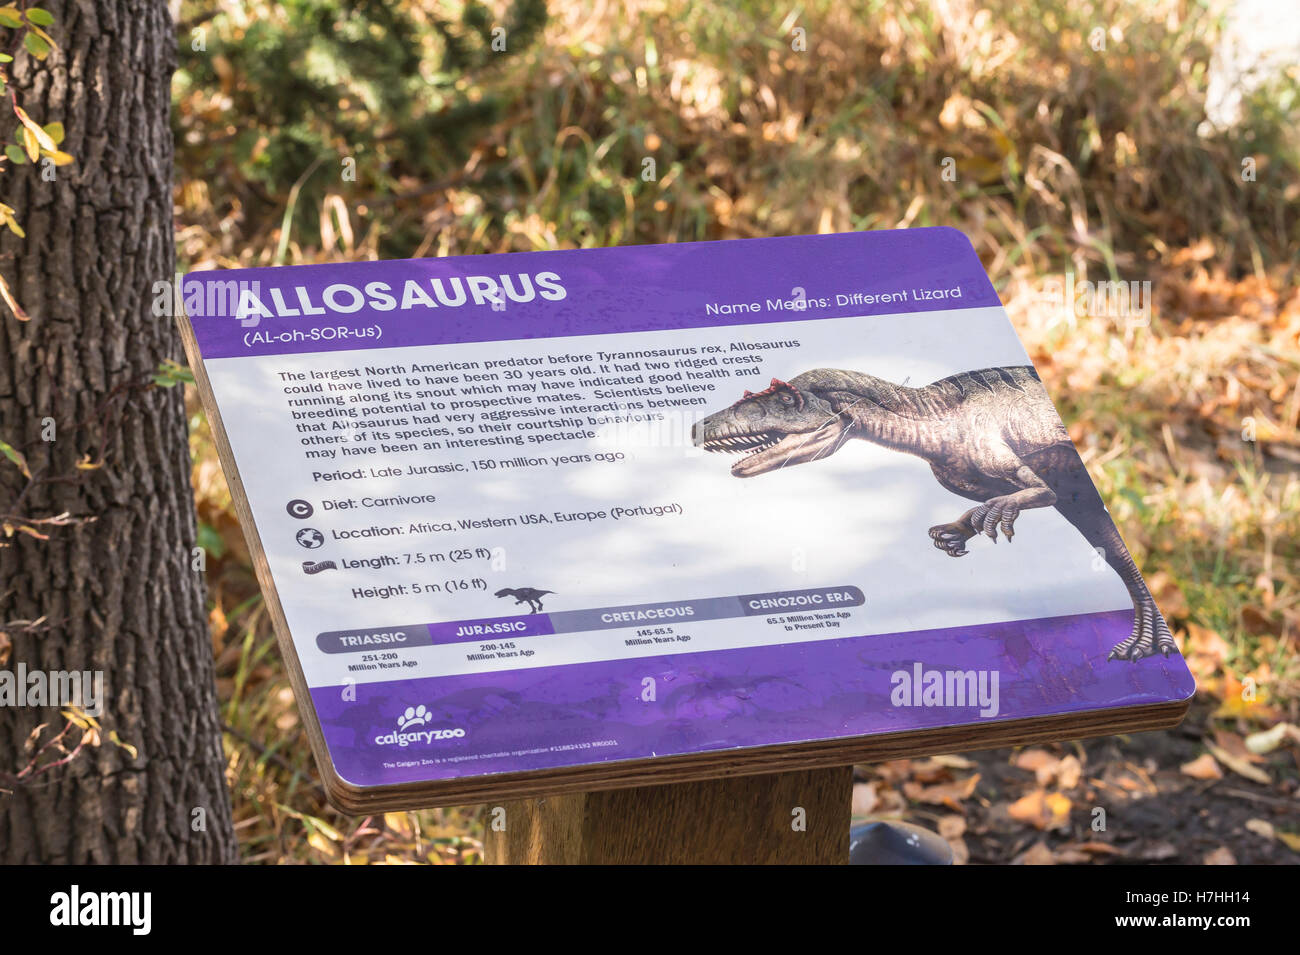 Allosaurus, information sign for largest North American predator before T. rex Stock Photo